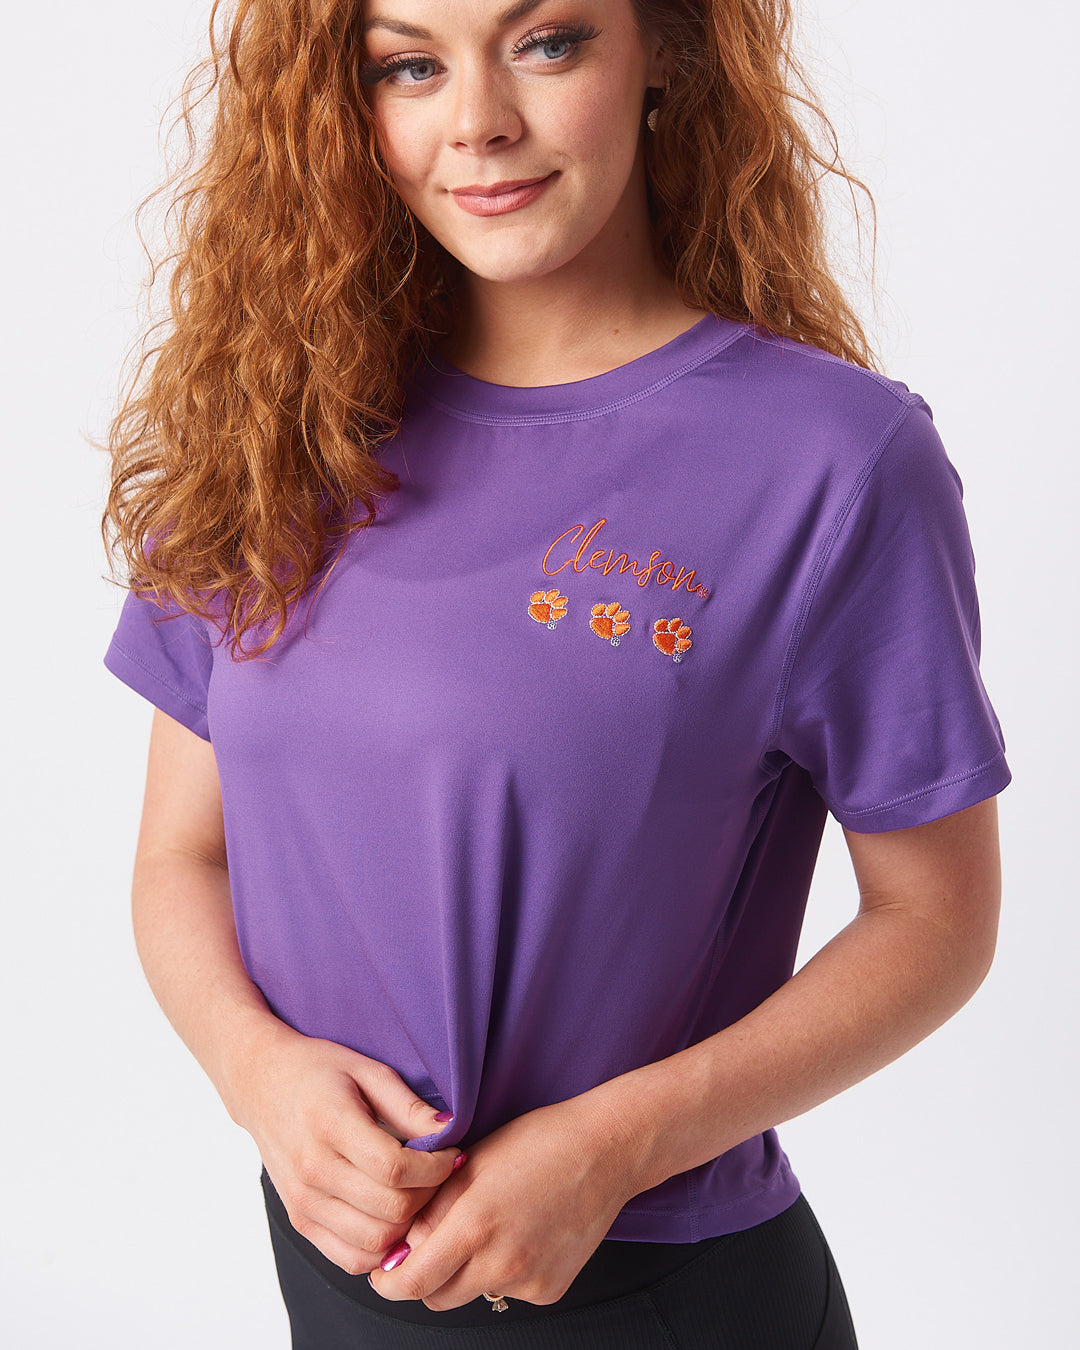 KADYLUXE® Clemson Tigers womens crop tee in color purple with Clemson and 3 paws embroidery on the left chest.